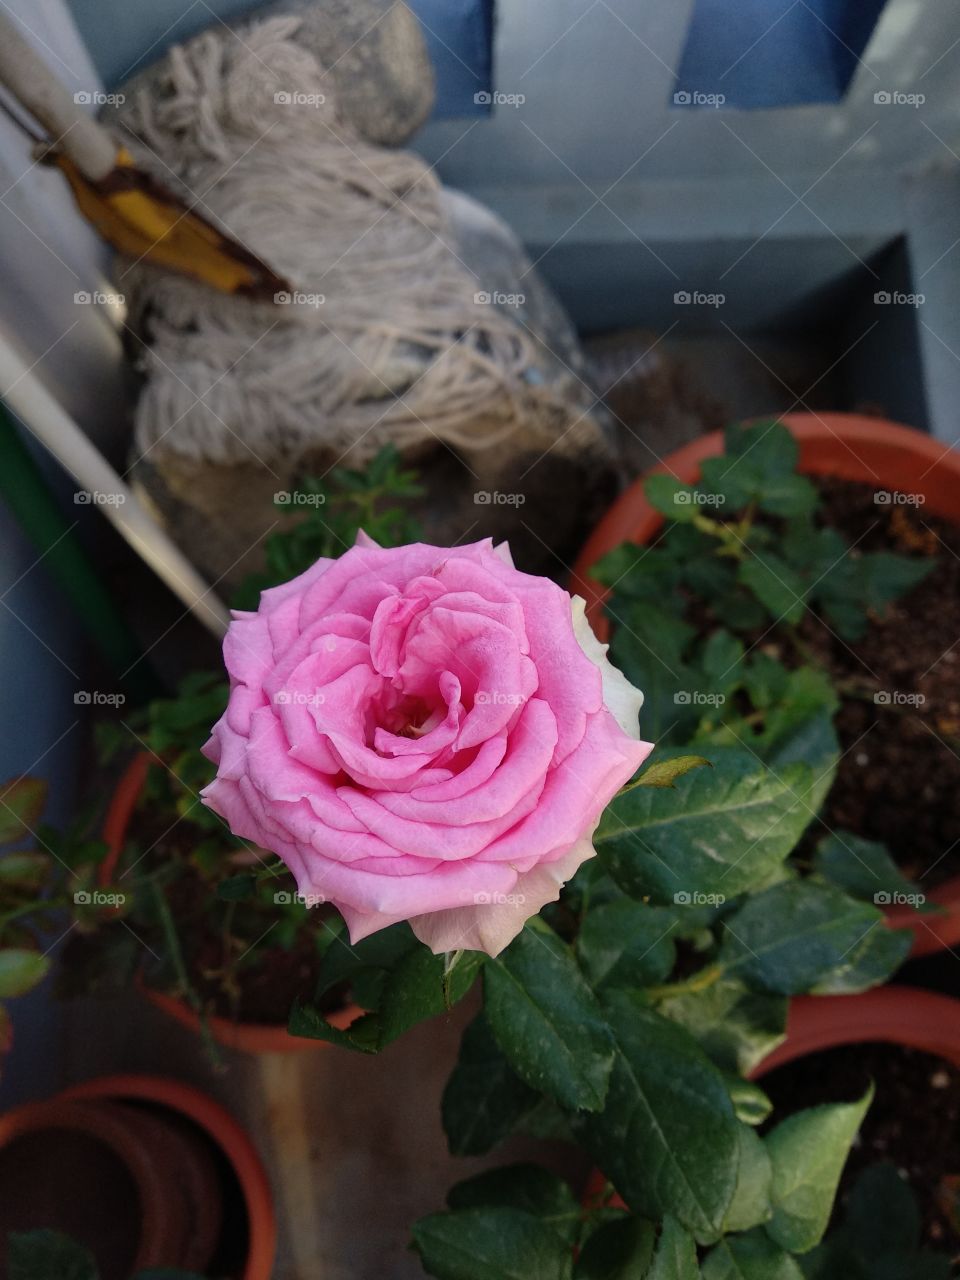 First bloomed rose